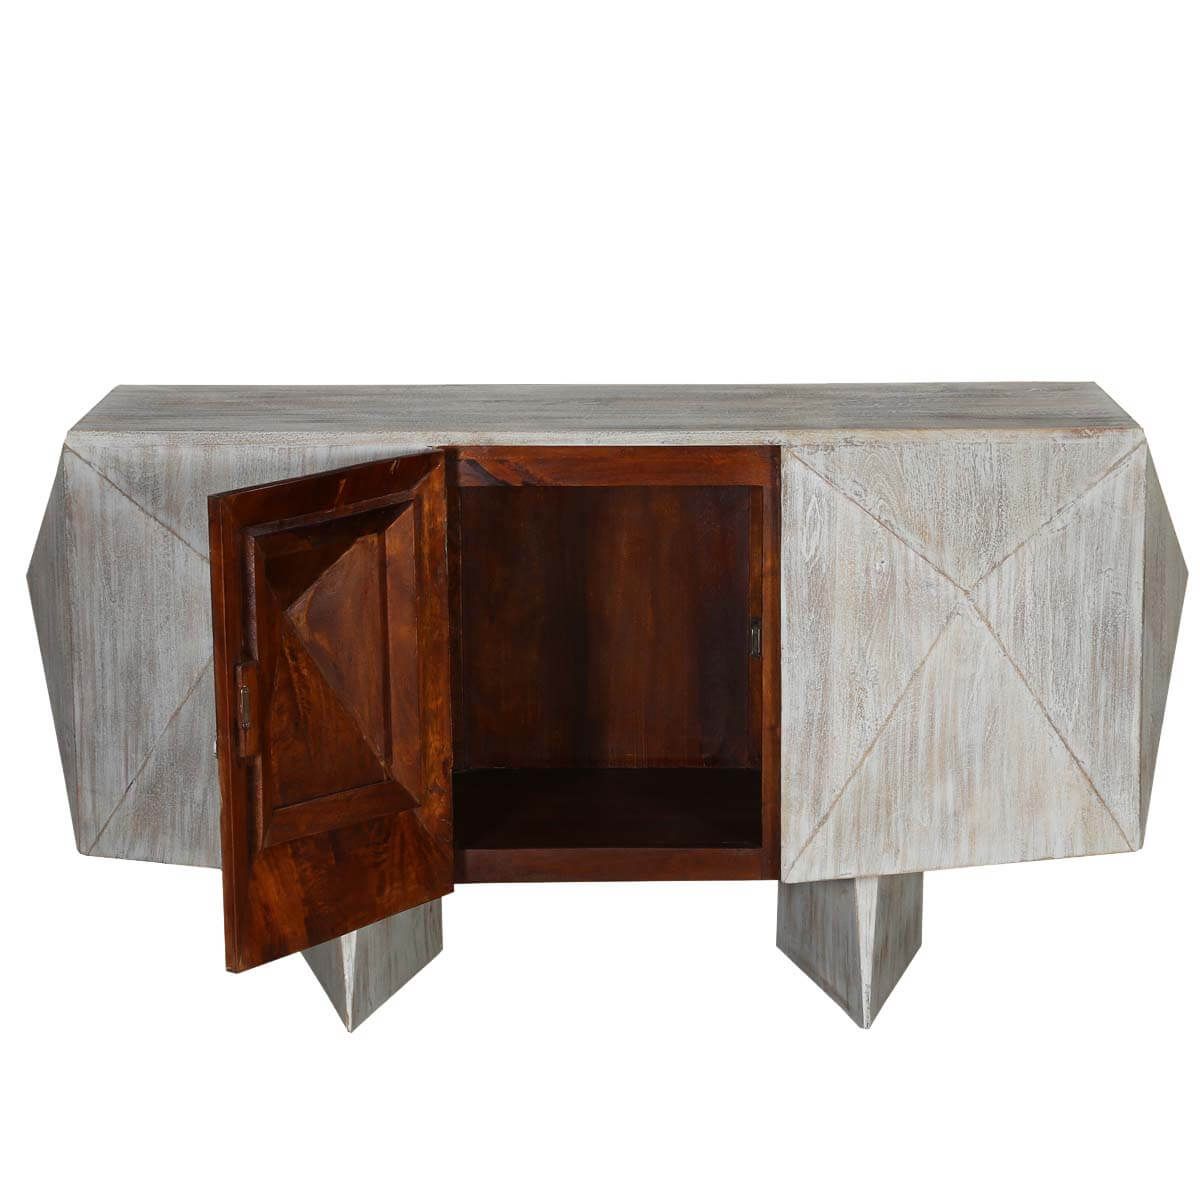 Modern Geometric Mango Wood Standing Tv Media Console Furniture Throughout White Geometric Console Tables (View 19 of 20)